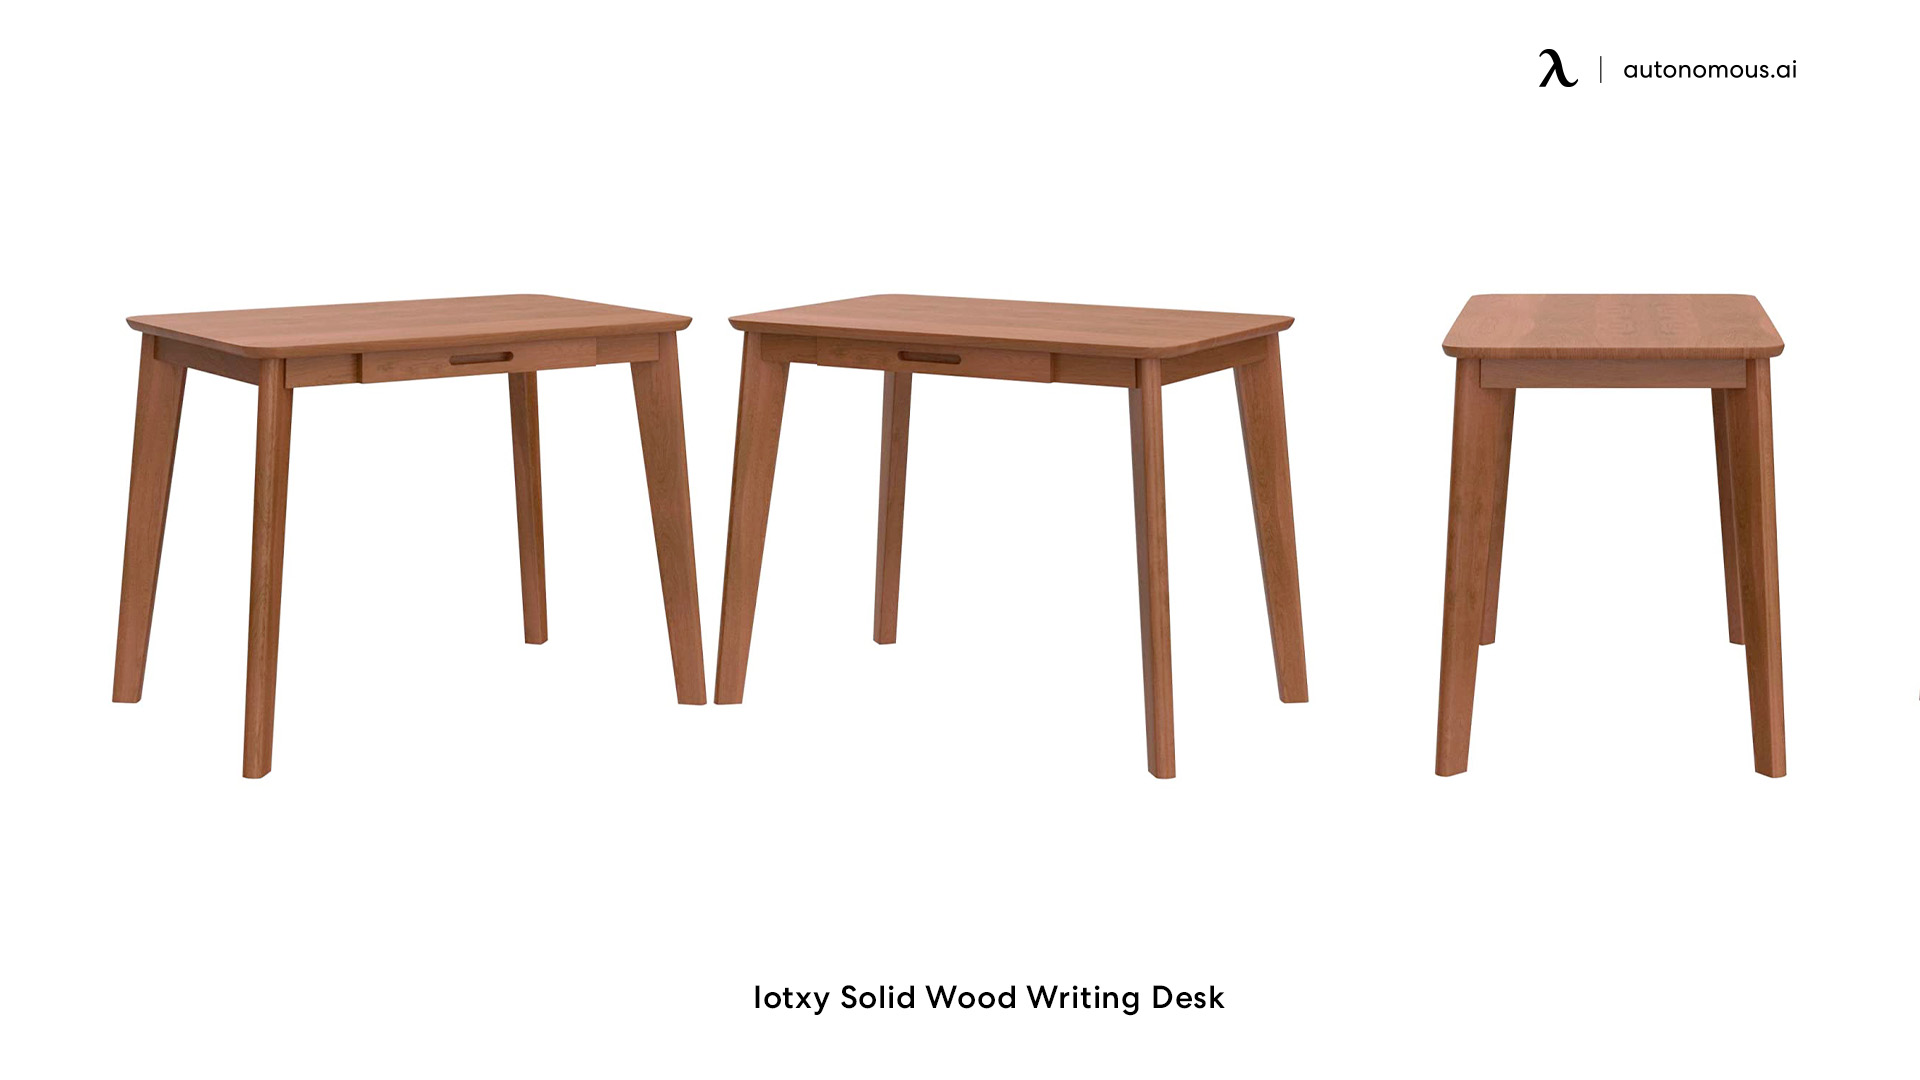 Iotxy Solid Wood Writing Desk